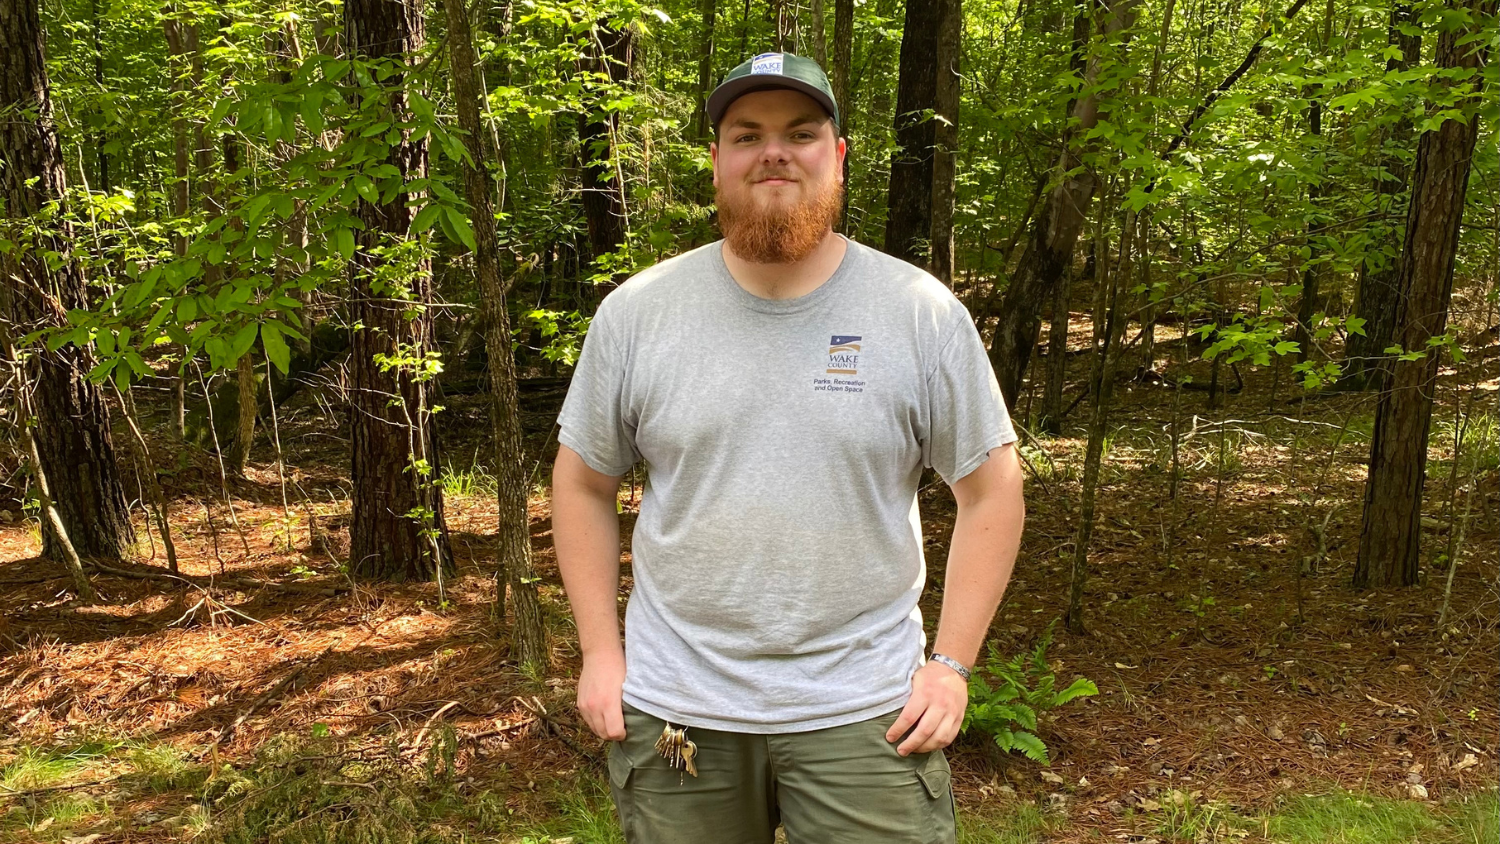 Eddie poses at park - 5 Questions with Park Technician Eddie Sykes - College of Natural Resources News NC State University